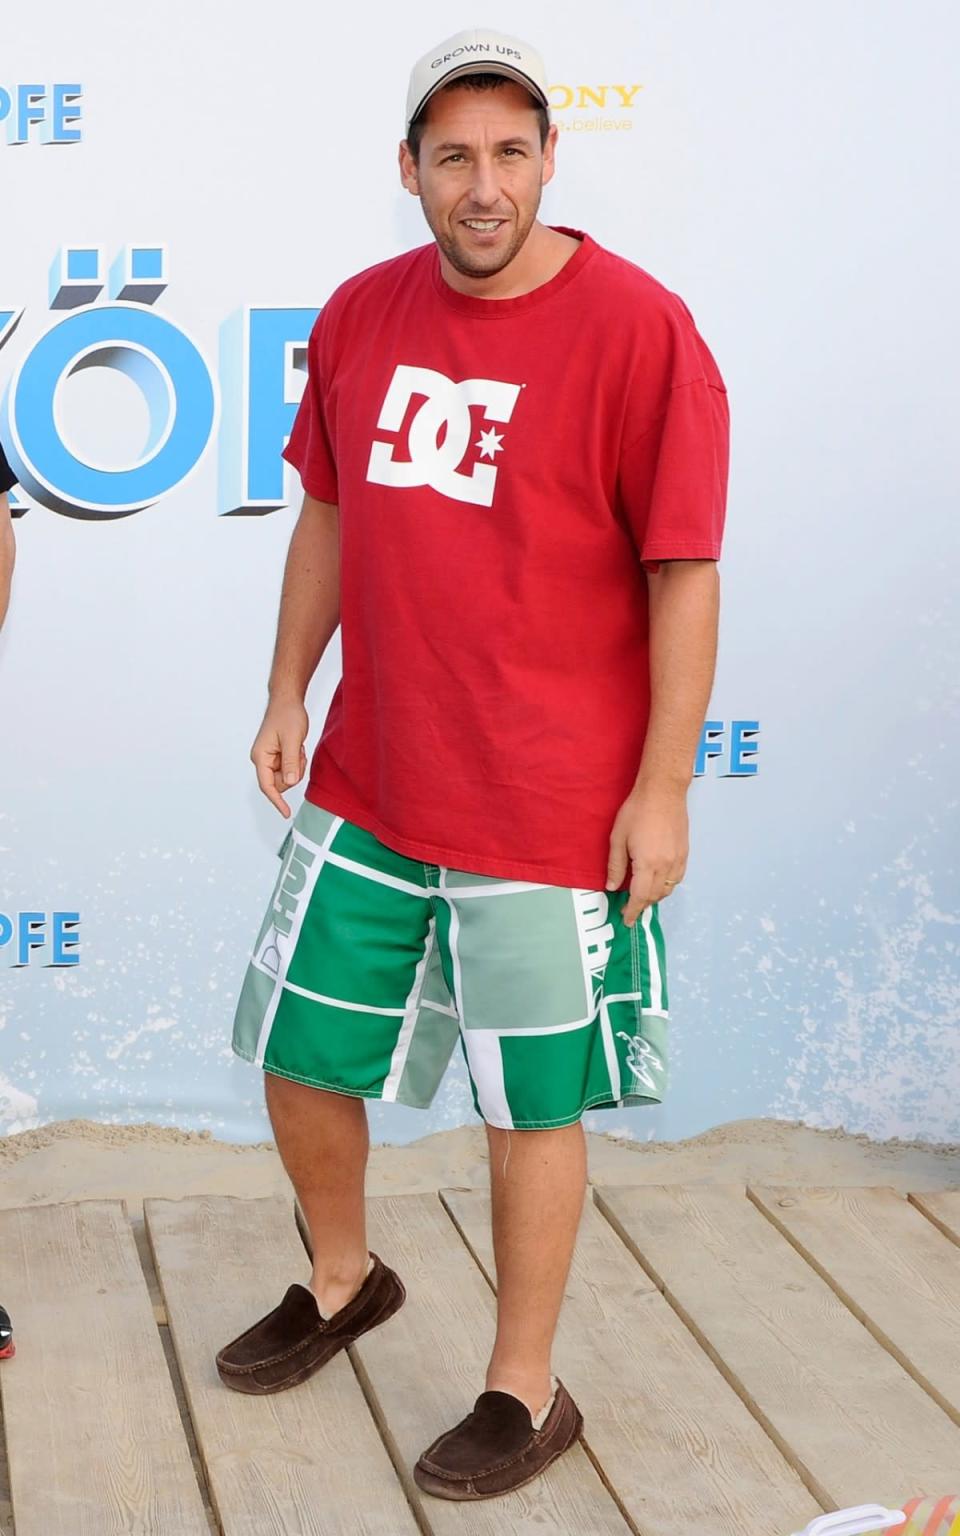 <p>Sandler broke out the board shorts (and slippers) to spread the word about <i>Grown Ups</i> in Berlin. (Photo: Toni Passig/WireImage)</p>